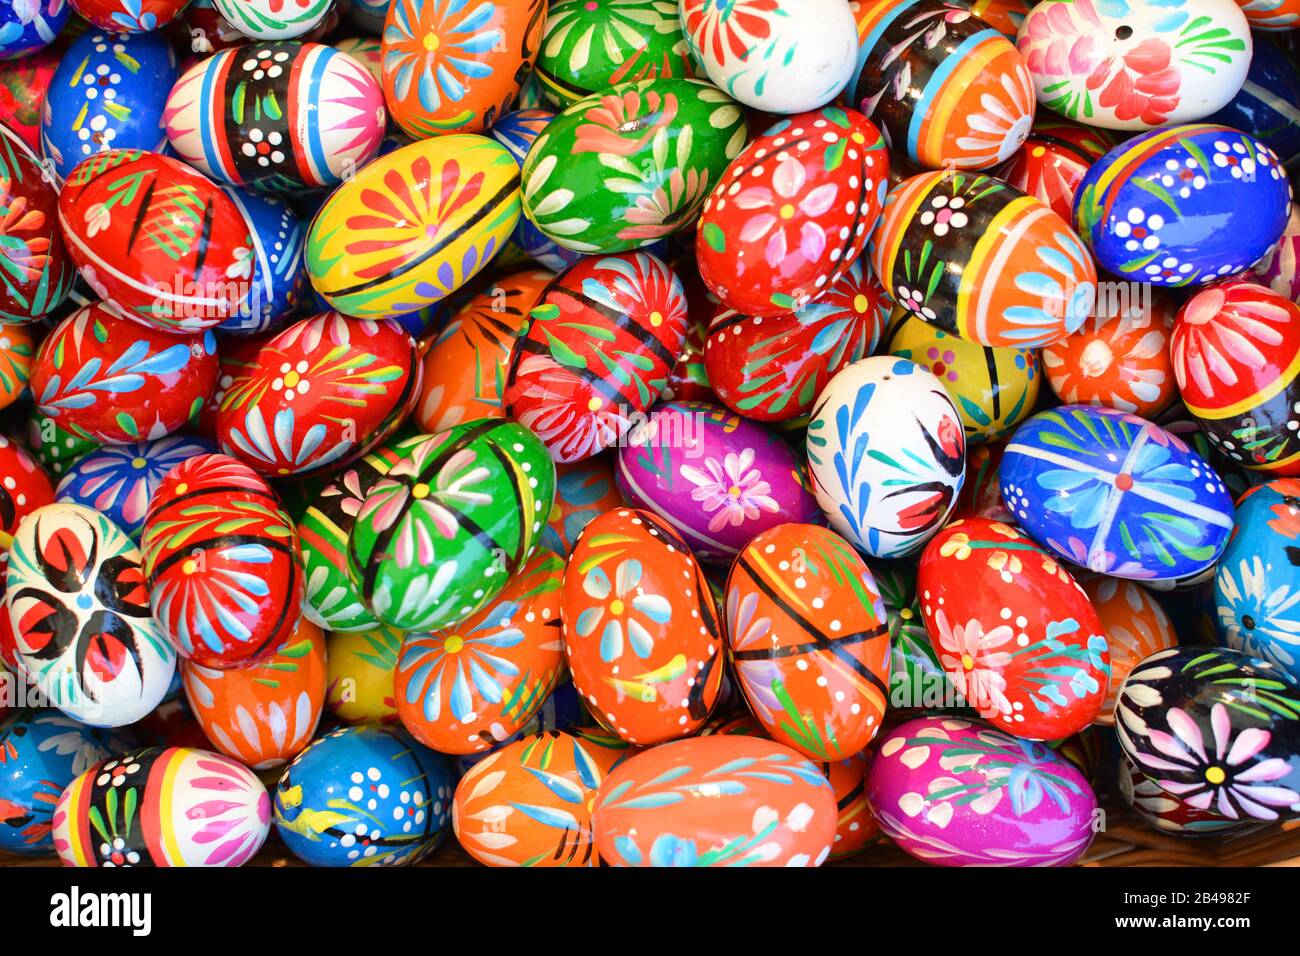 KRAKOW, POLAND - MARCH 29, 2015: Painted eggs 'pisanki' on Easter market. The annual Easter Fair in the Market Square is a popular tourist attraction Stock Photo